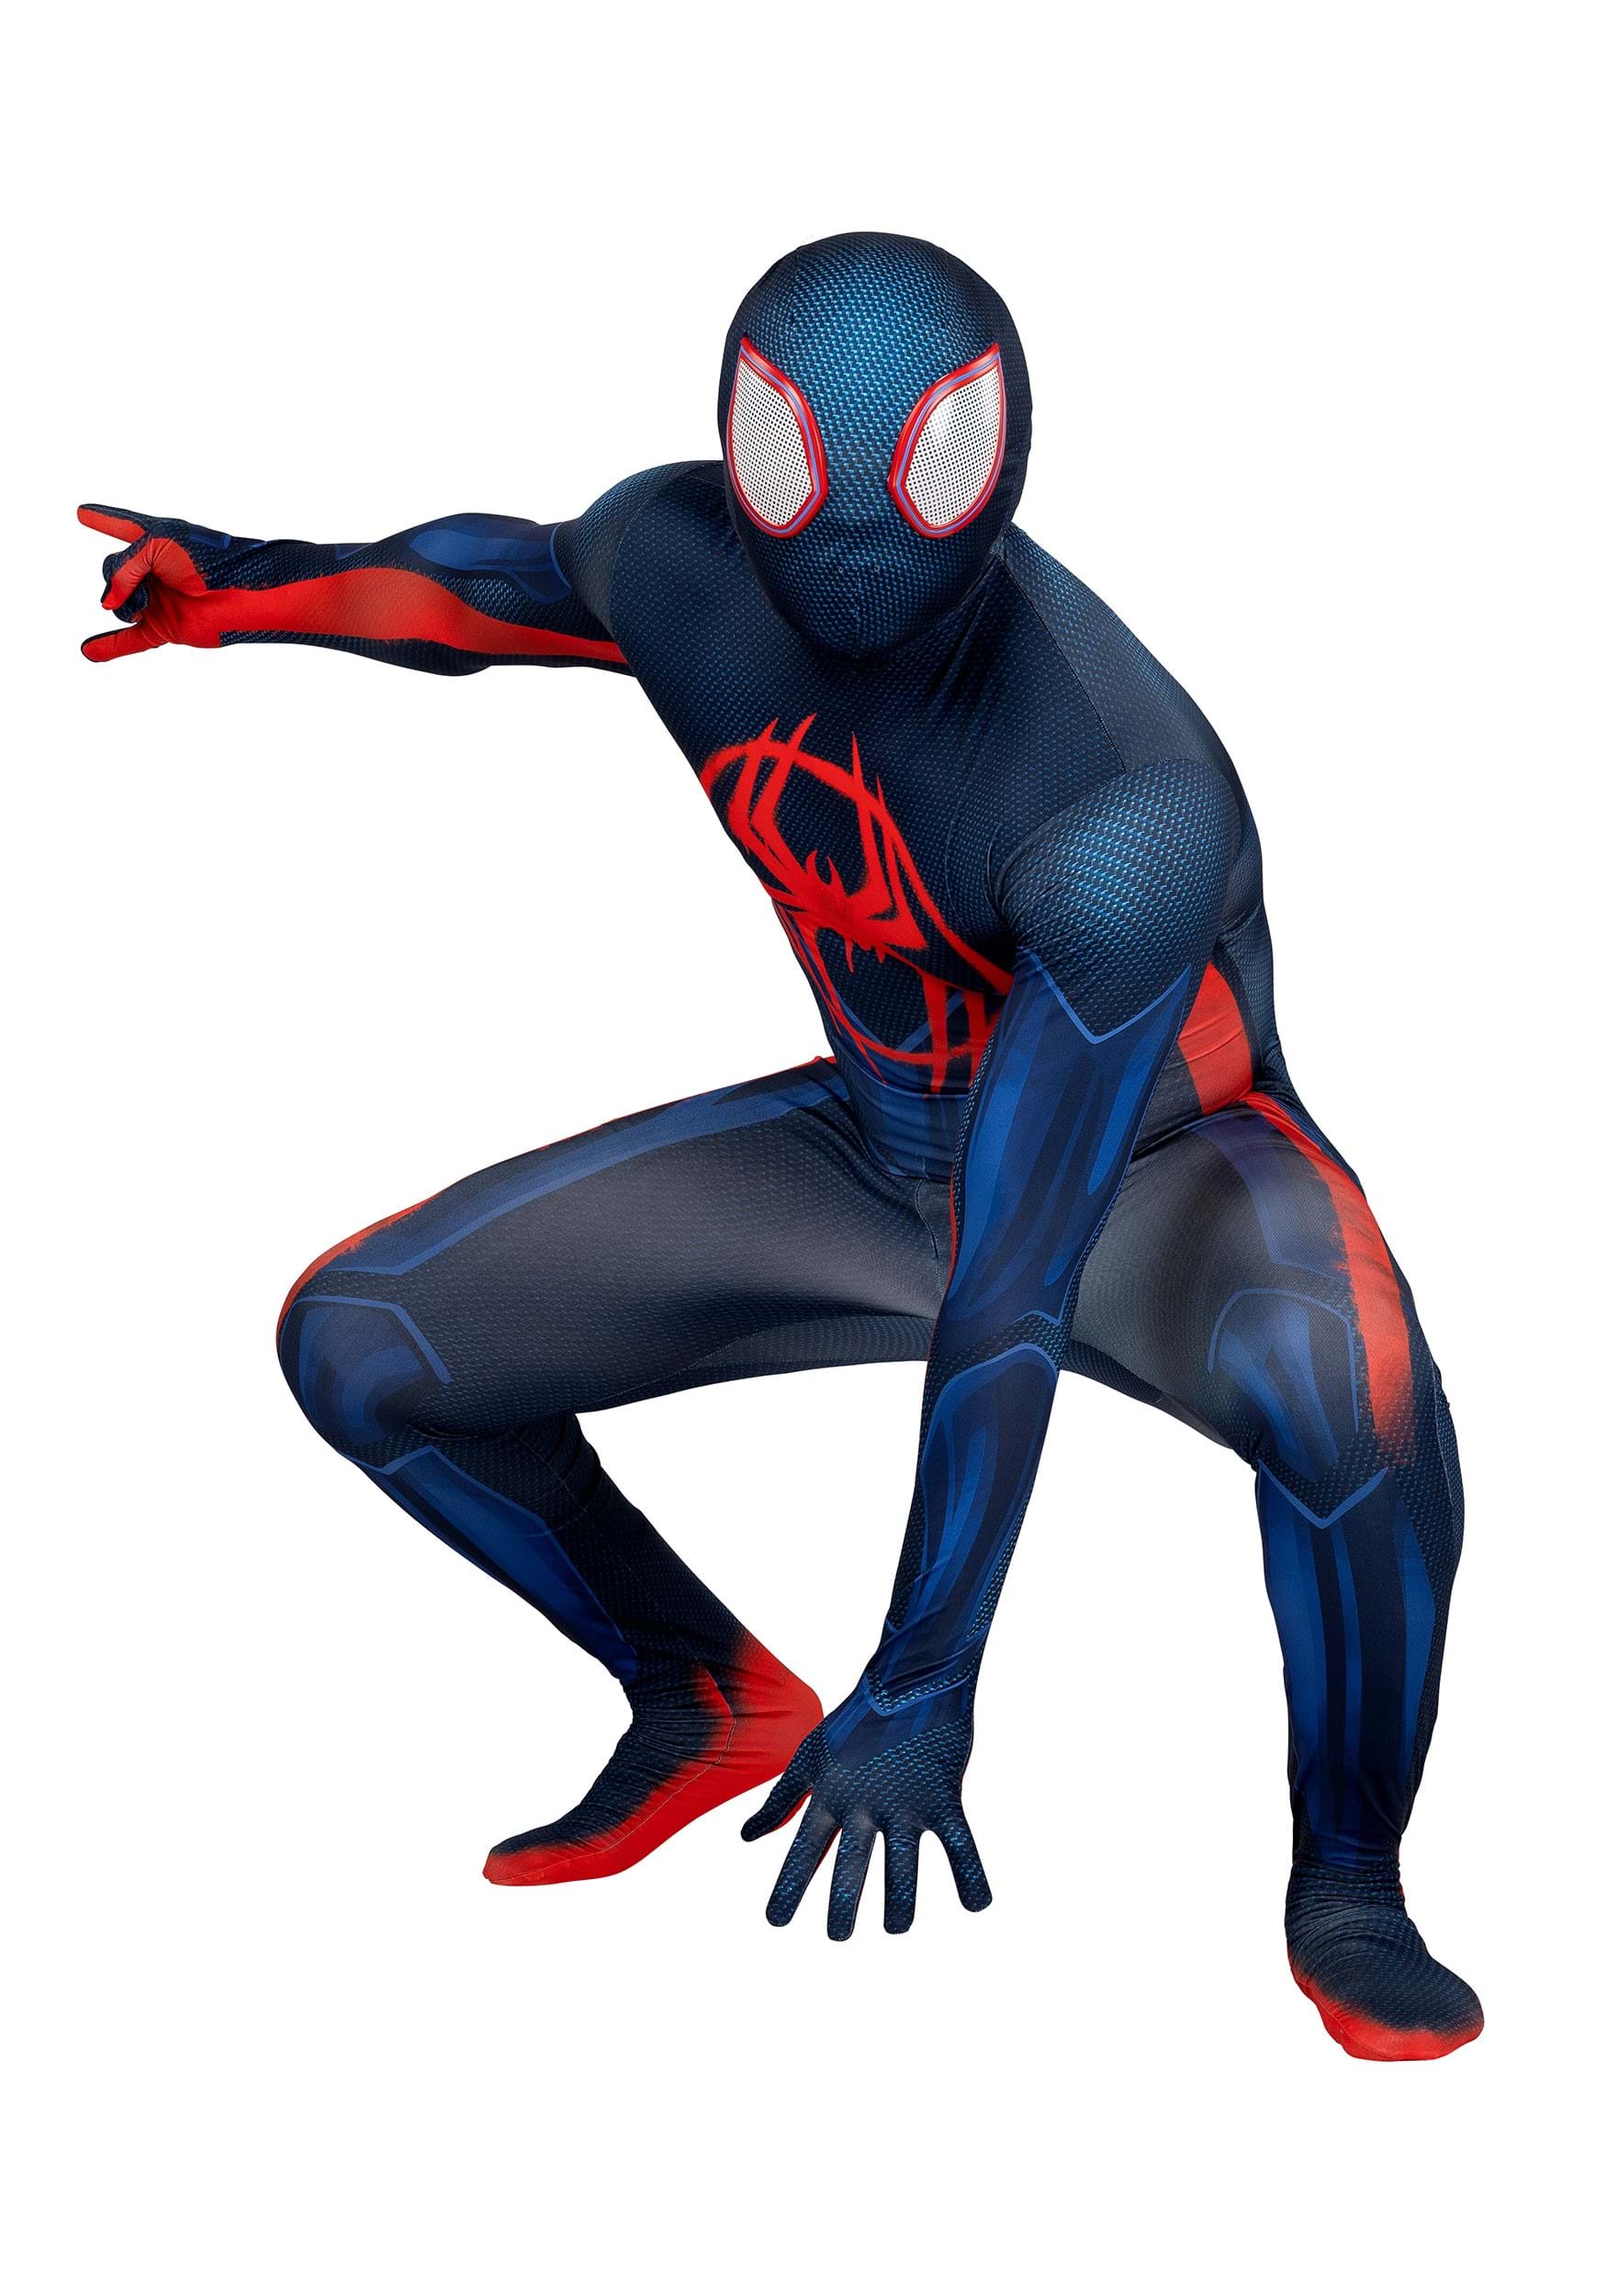 https://images.halloweencostumes.eu/products/93113/1-1/spiderverse-2-adult-miles-morales-zentai-suit-main-upd.jpg